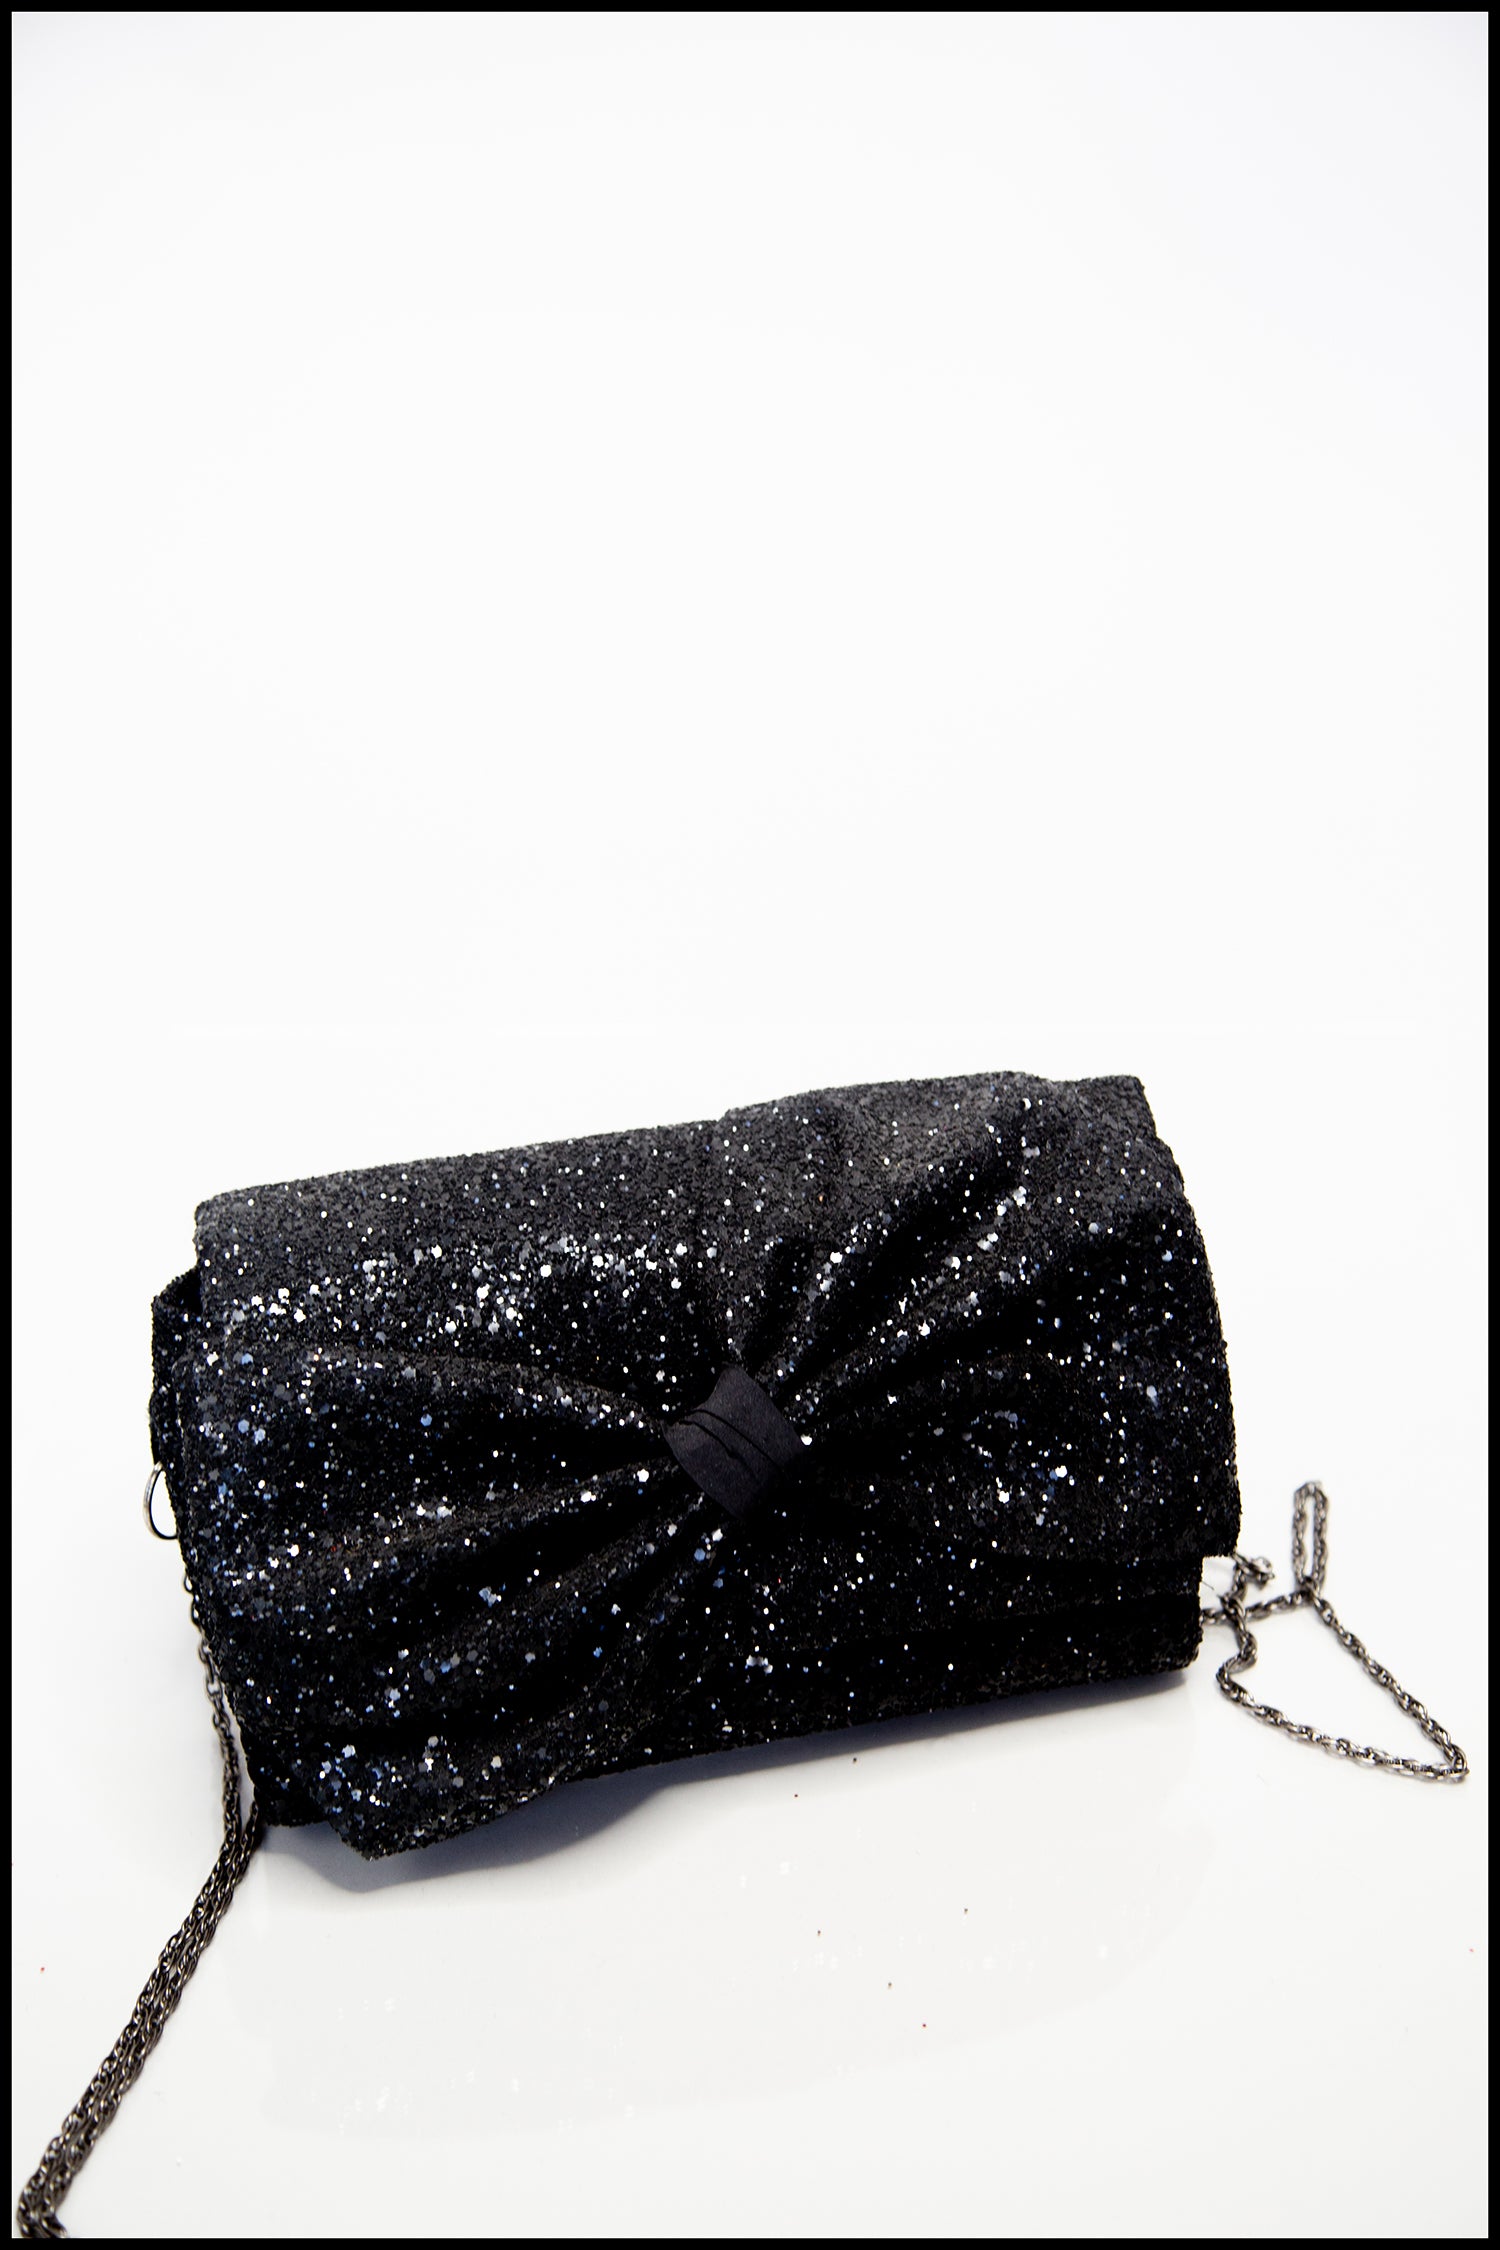 Women's Mini Star Bag in black glossy leather with tone-on-tone star |  Golden Goose